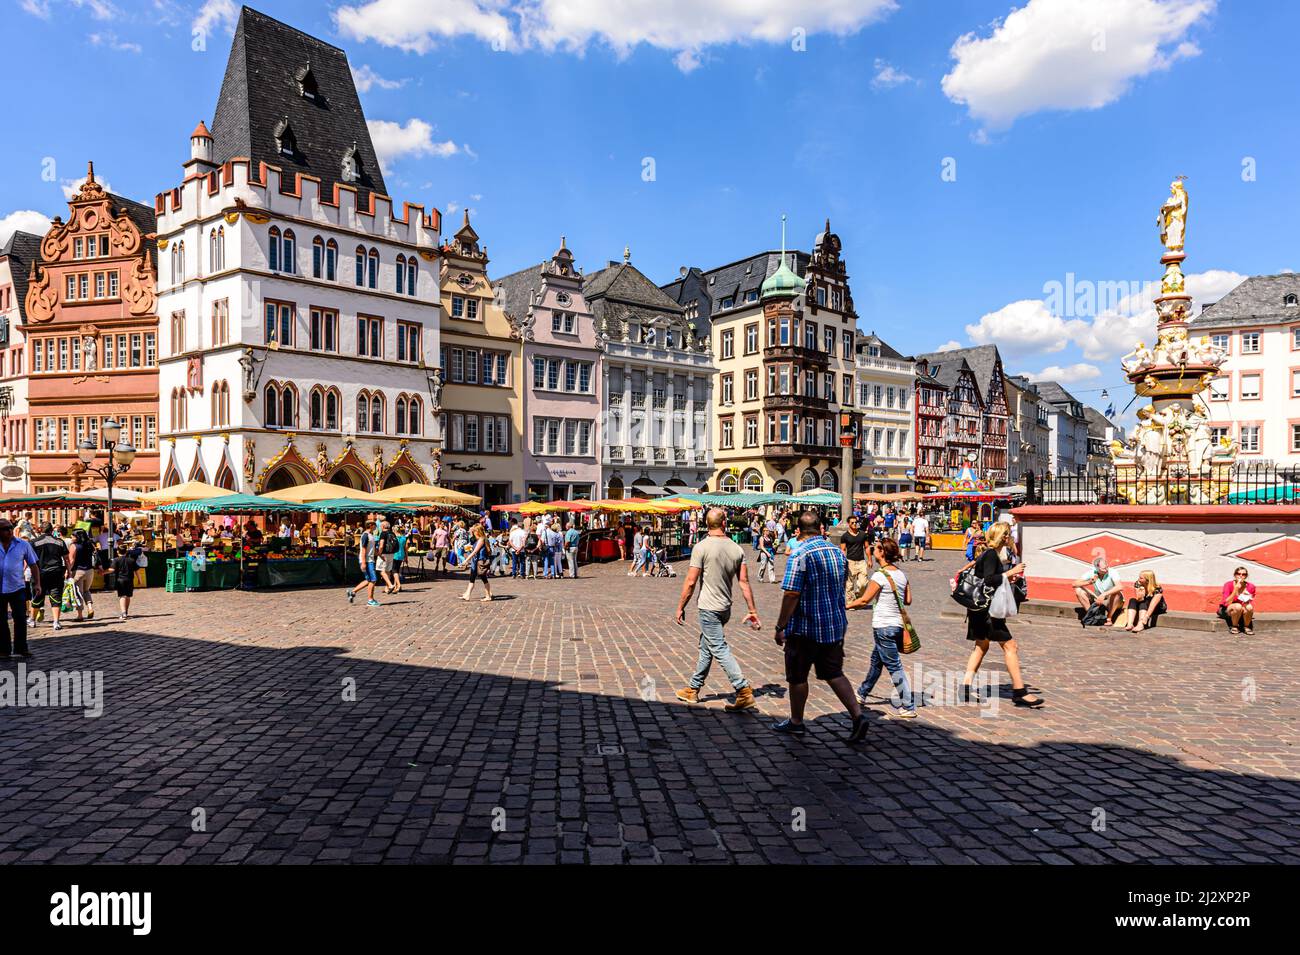 Trier, Germany, August 01, 2015: some people in front of traditional houses at market place in the old town Stock Photo